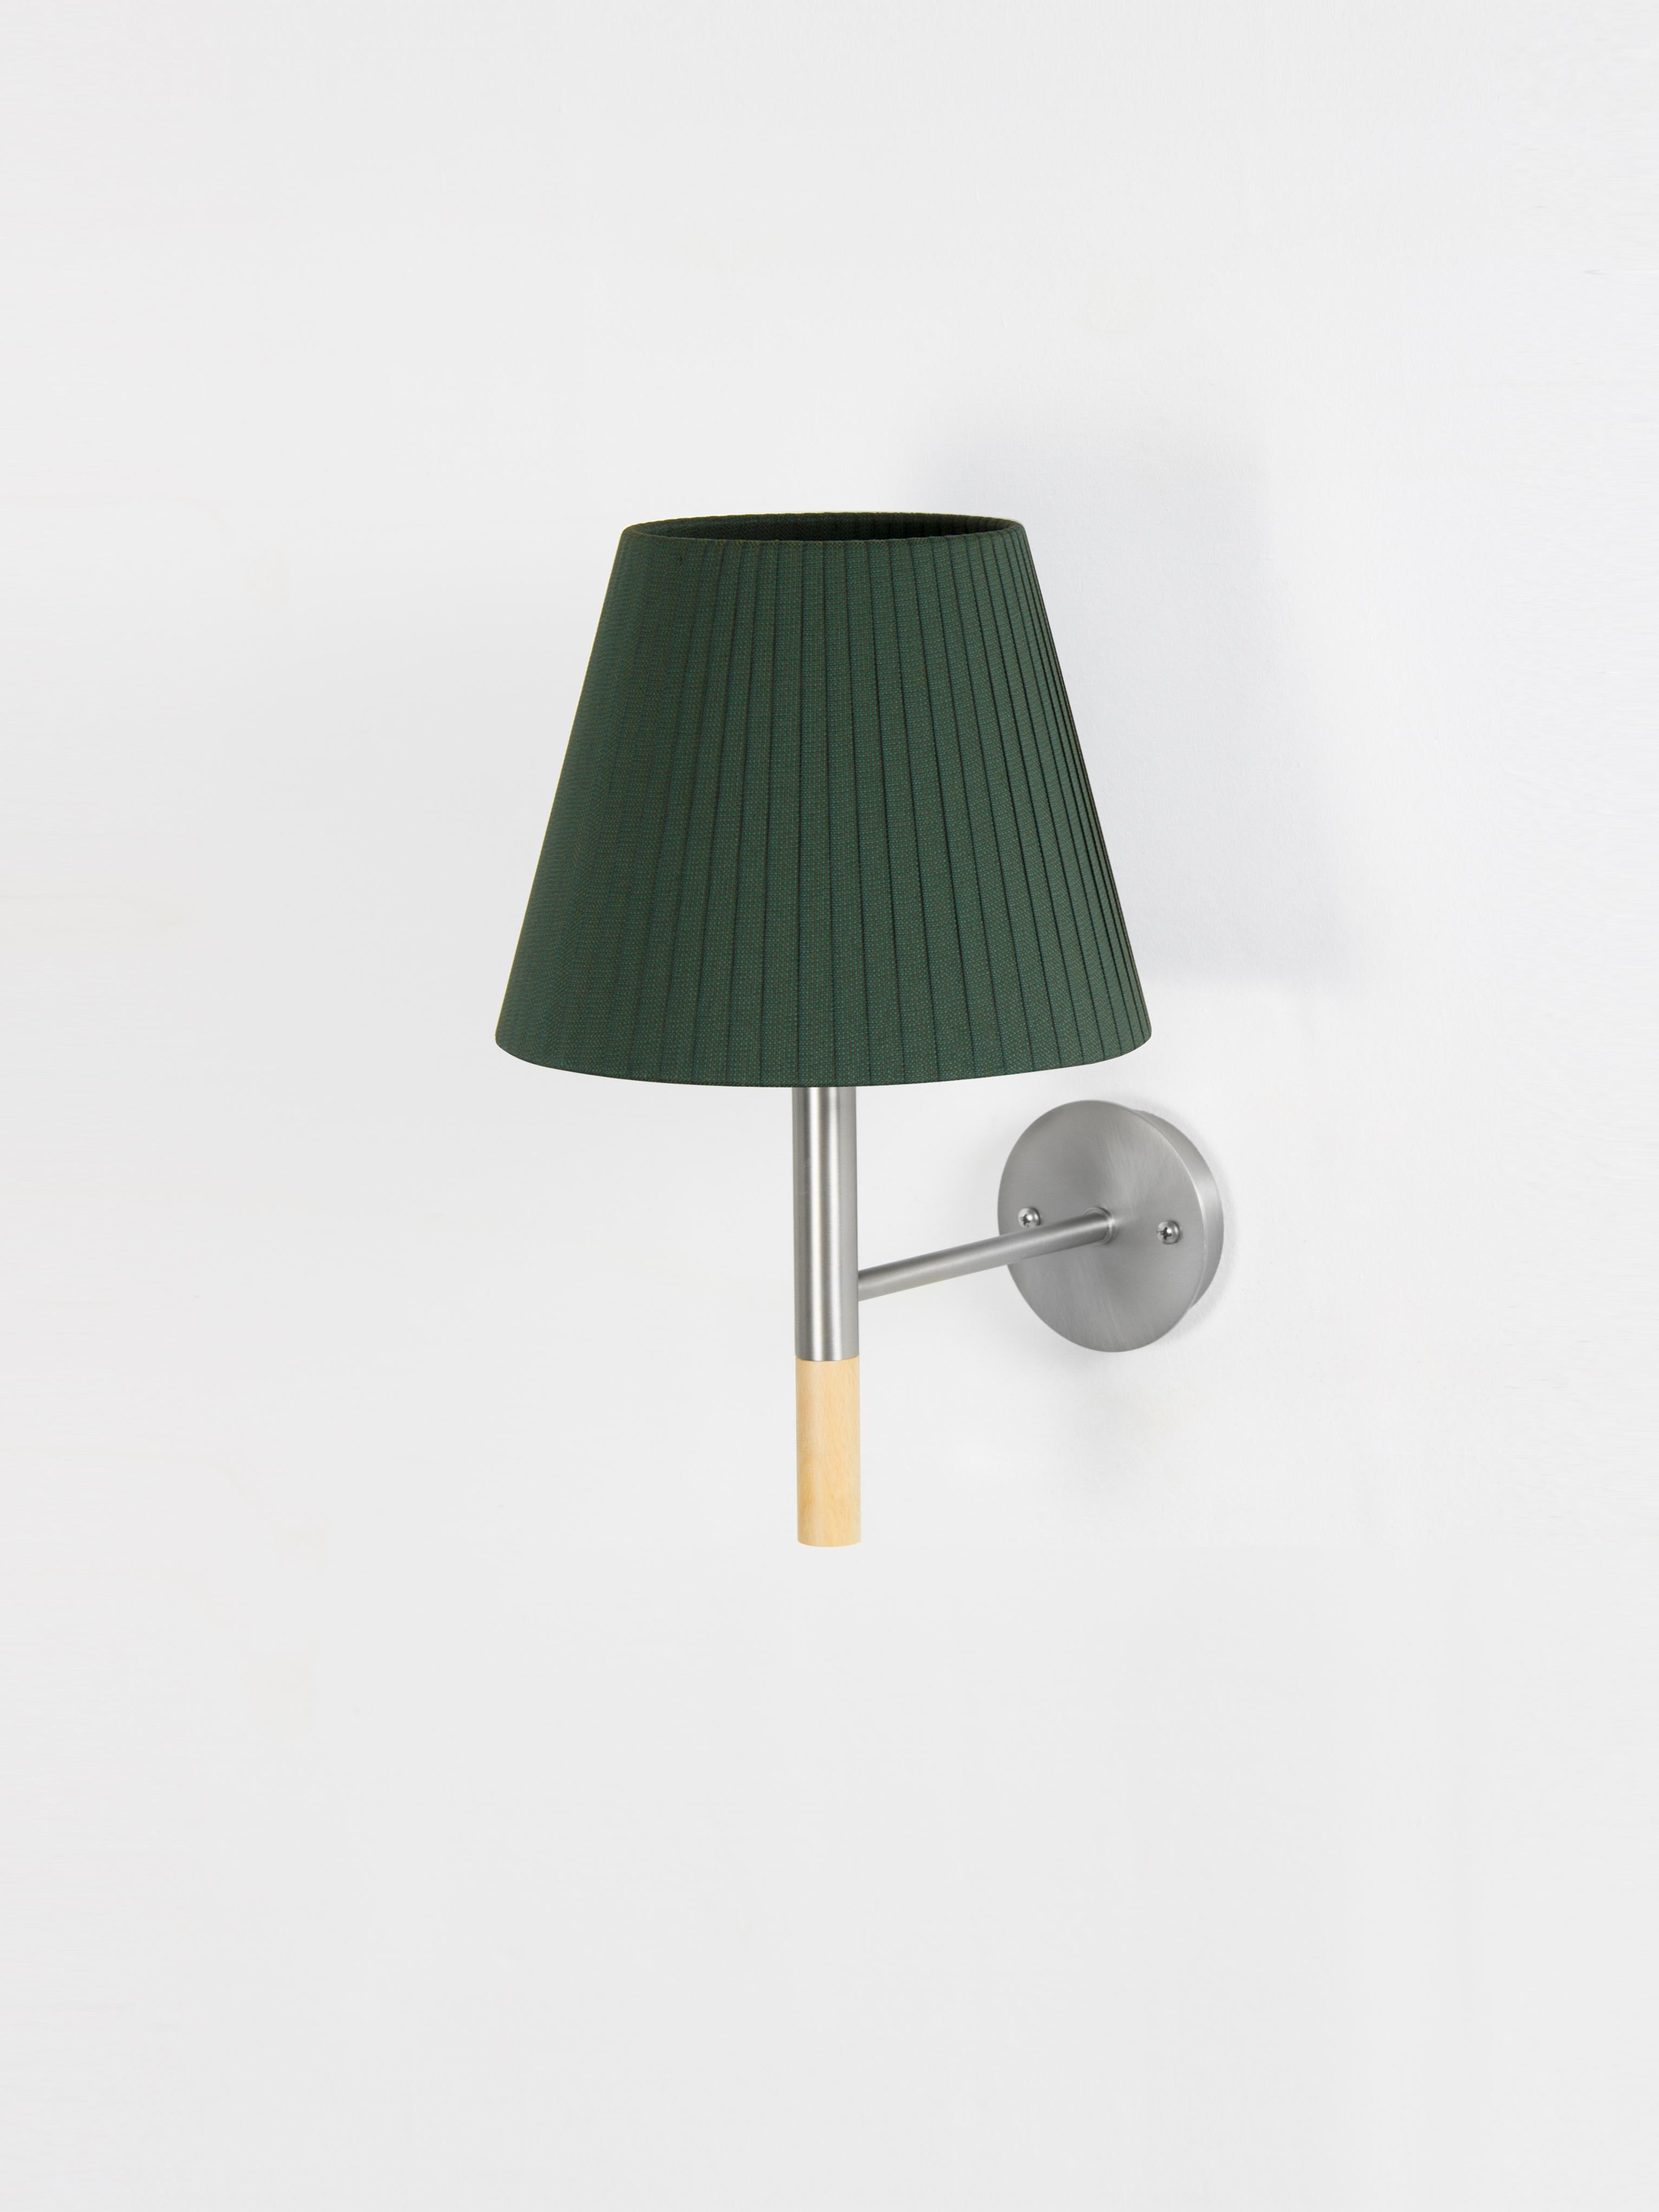 Green BC2 wall lamp by Santa & Cole
Dimensions: D 20 x W 26 x H 33 cm
Materials: Metal, beech wood, ribbon.

The BC1, BC2 and BC3 wall lamps are the epitome of sturdy construction, aesthetic sobriety and functional quality. Their various shade